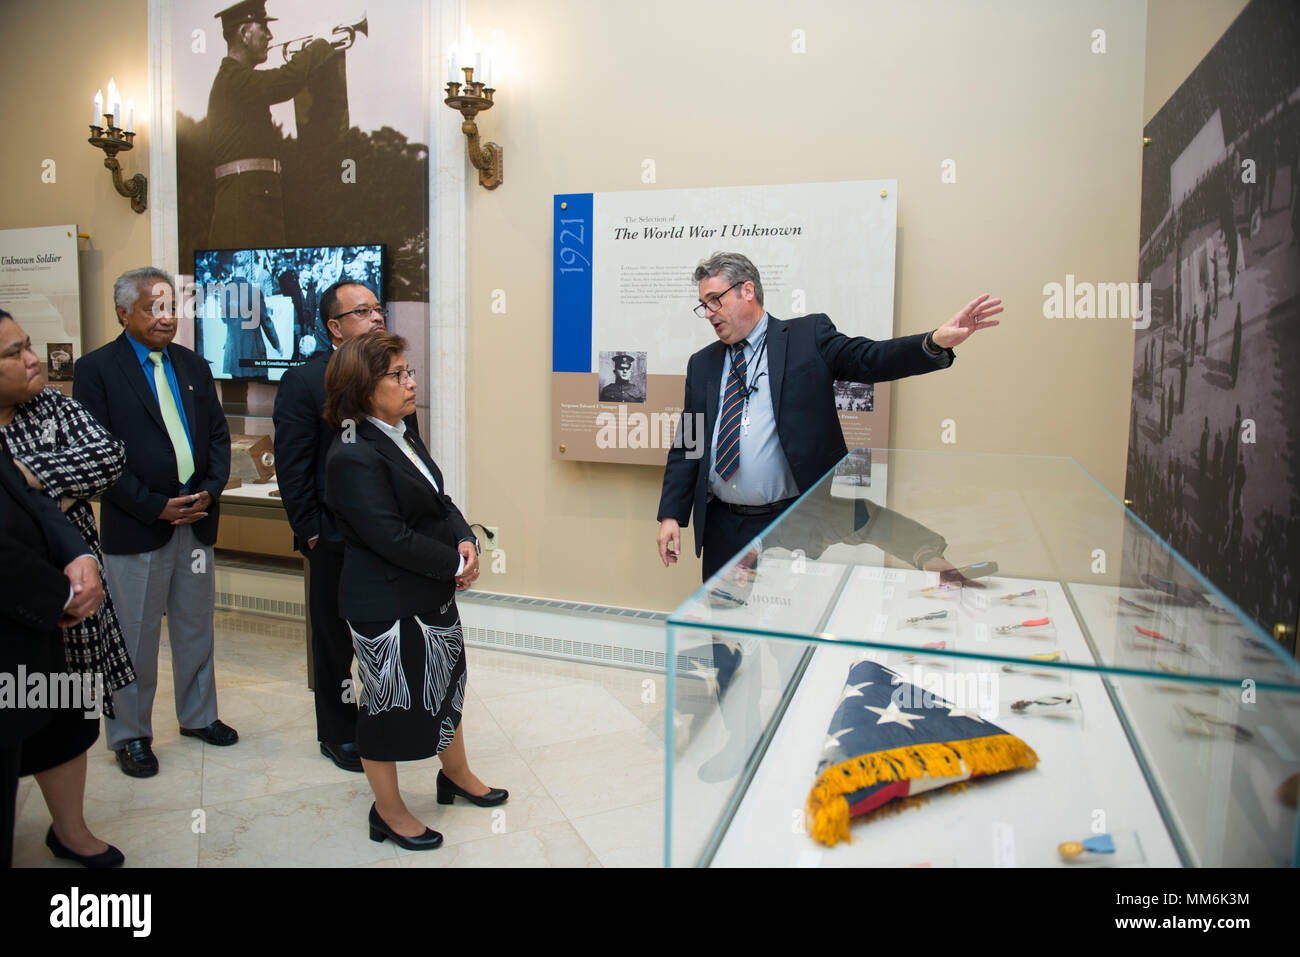 President of the Republic of the Marshall Islands, H.E. Hilda C. Heine  (center), and members of the Republic of the Marshall Islands delegation  receive a tour from Roderick Gainer, historian, Arlington National